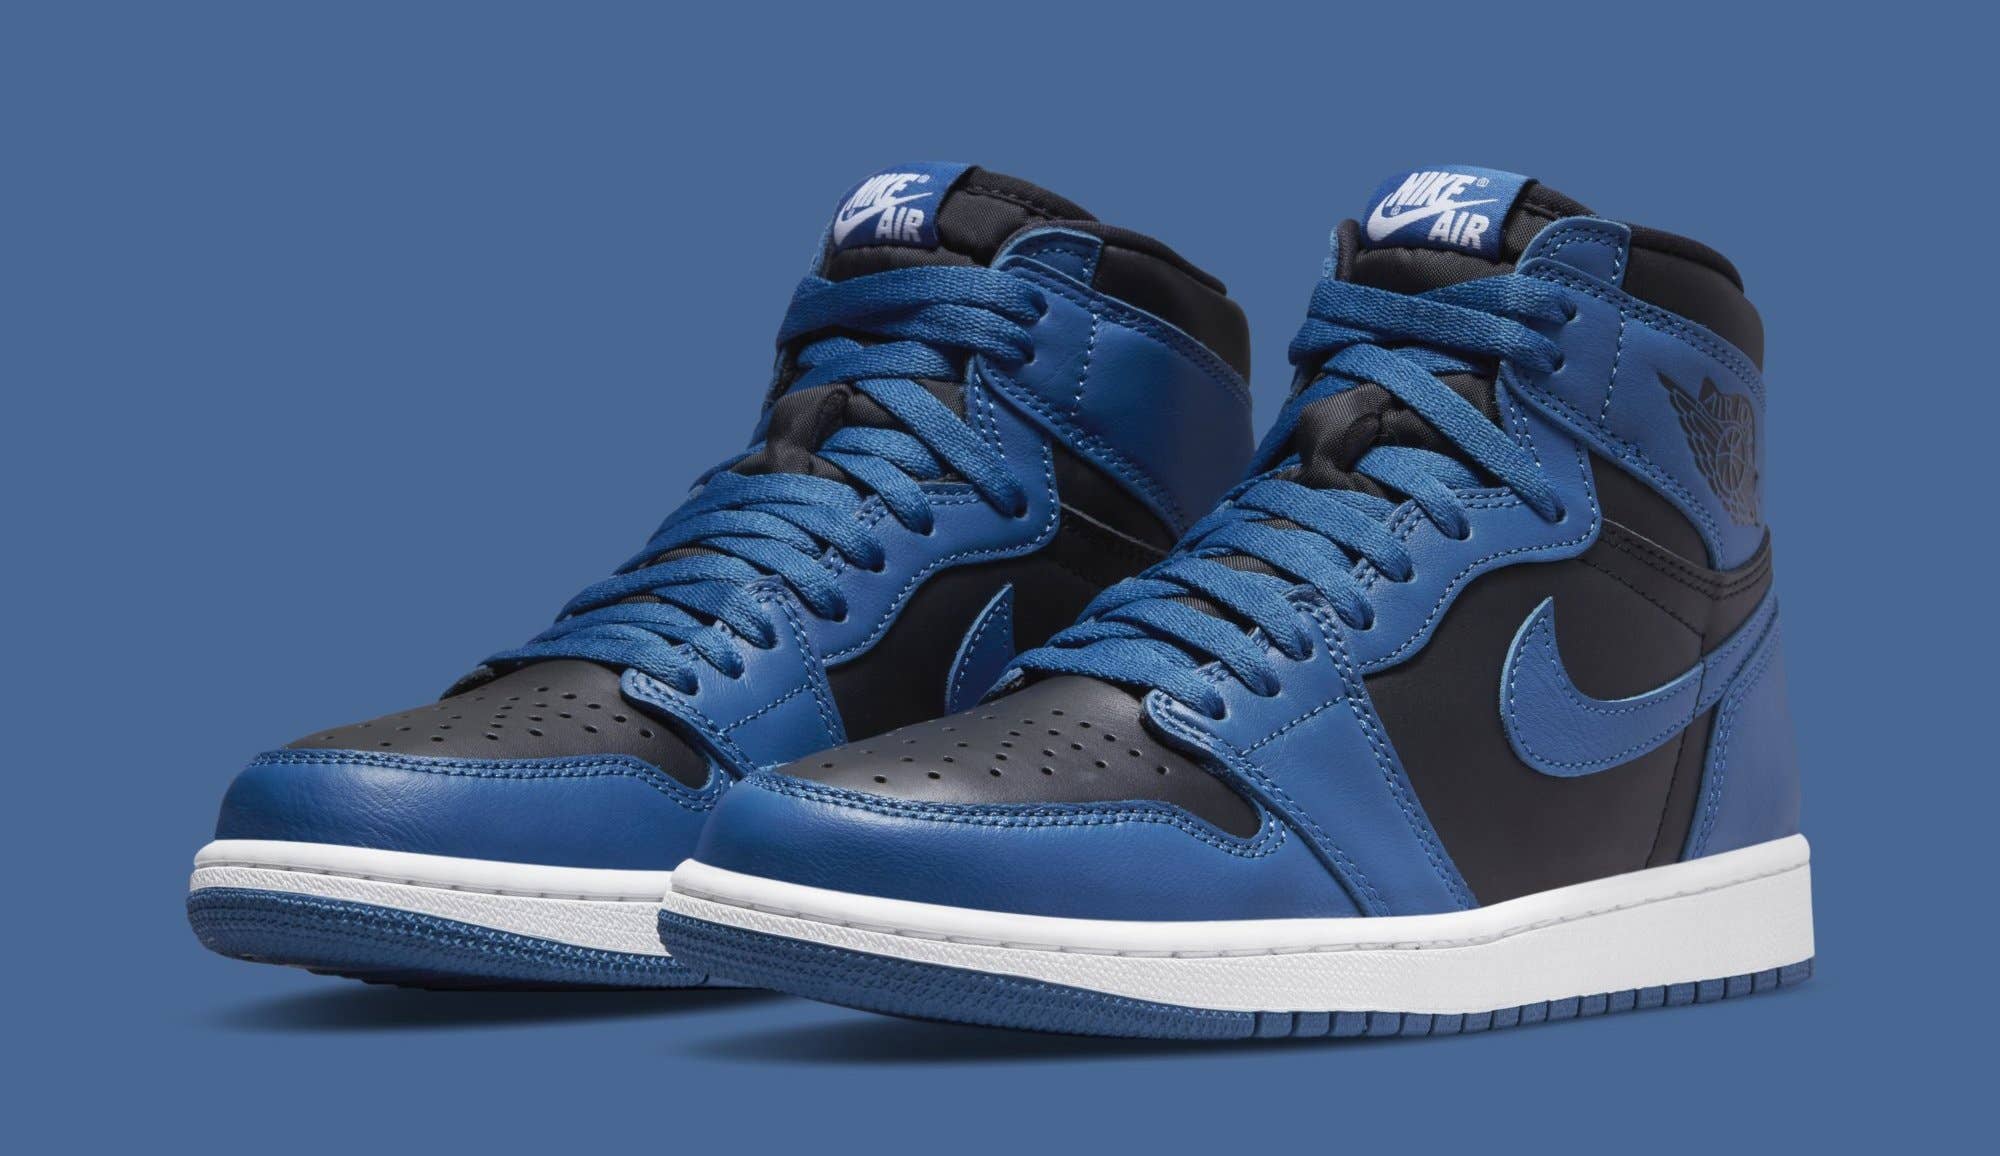 Withered Bage Penneven Air Jordan 1 'Dark Marina Blue' Expected to Release in February | Complex